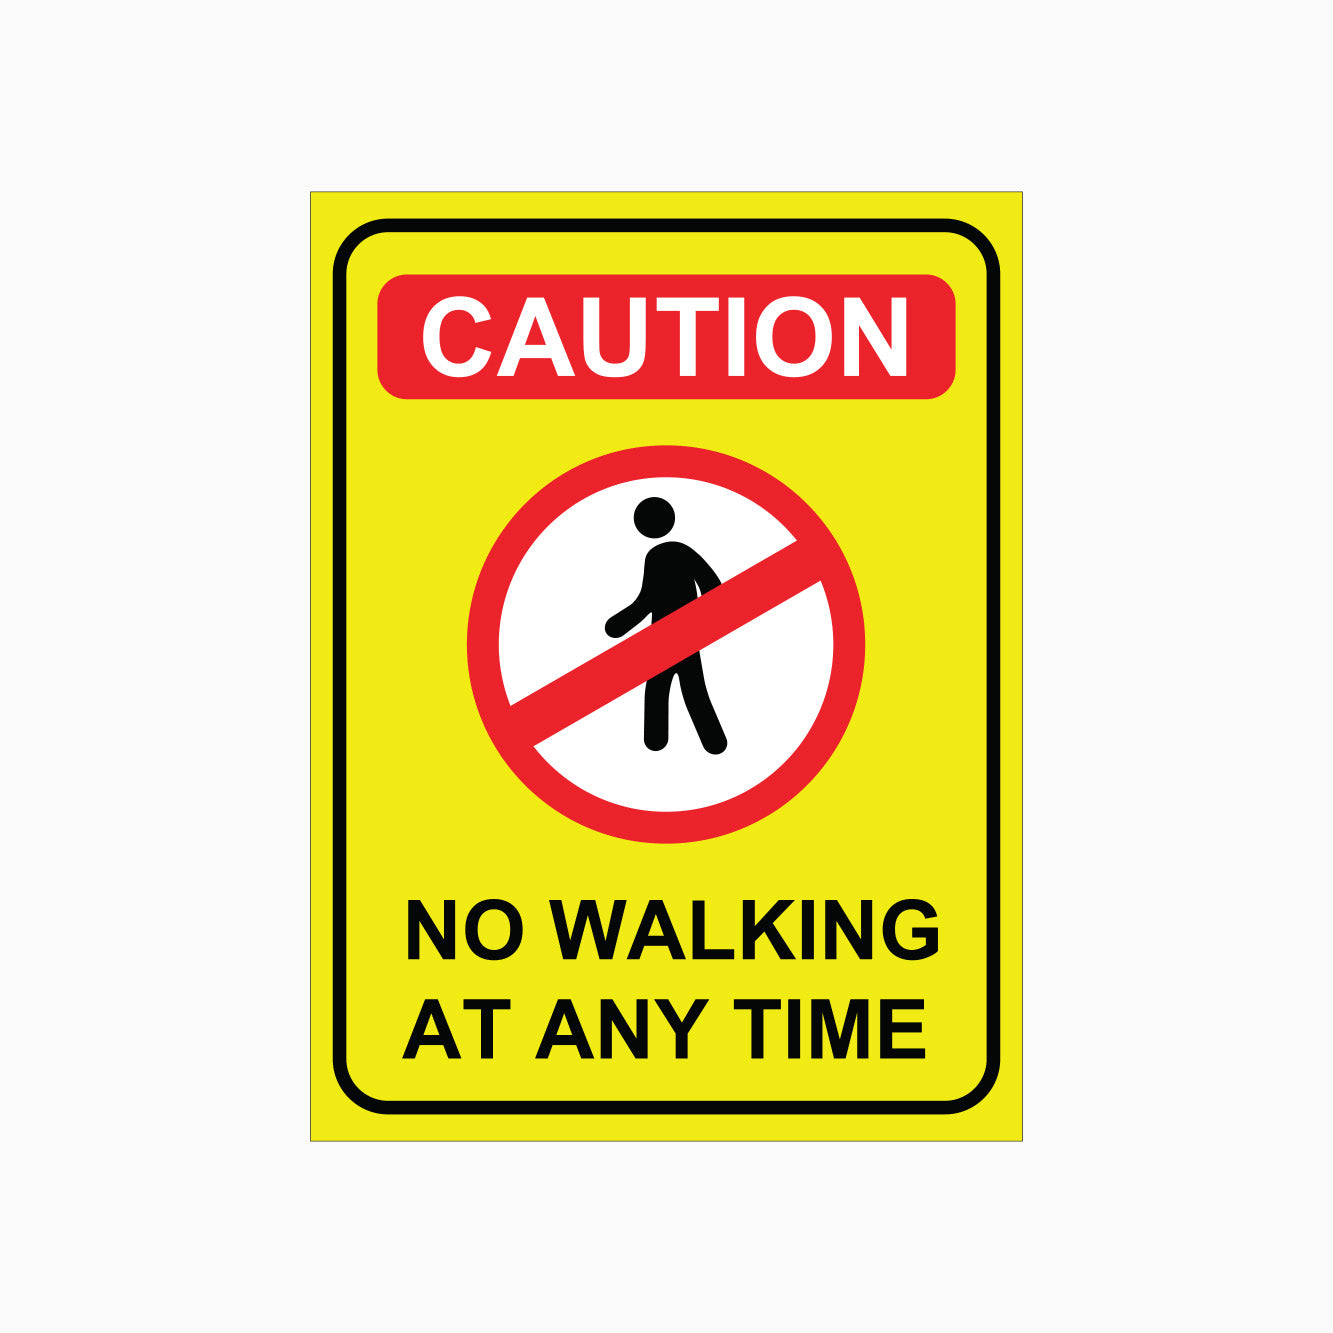 CAUTION SIGN - NO WALKING AT ANY TIME SIGN